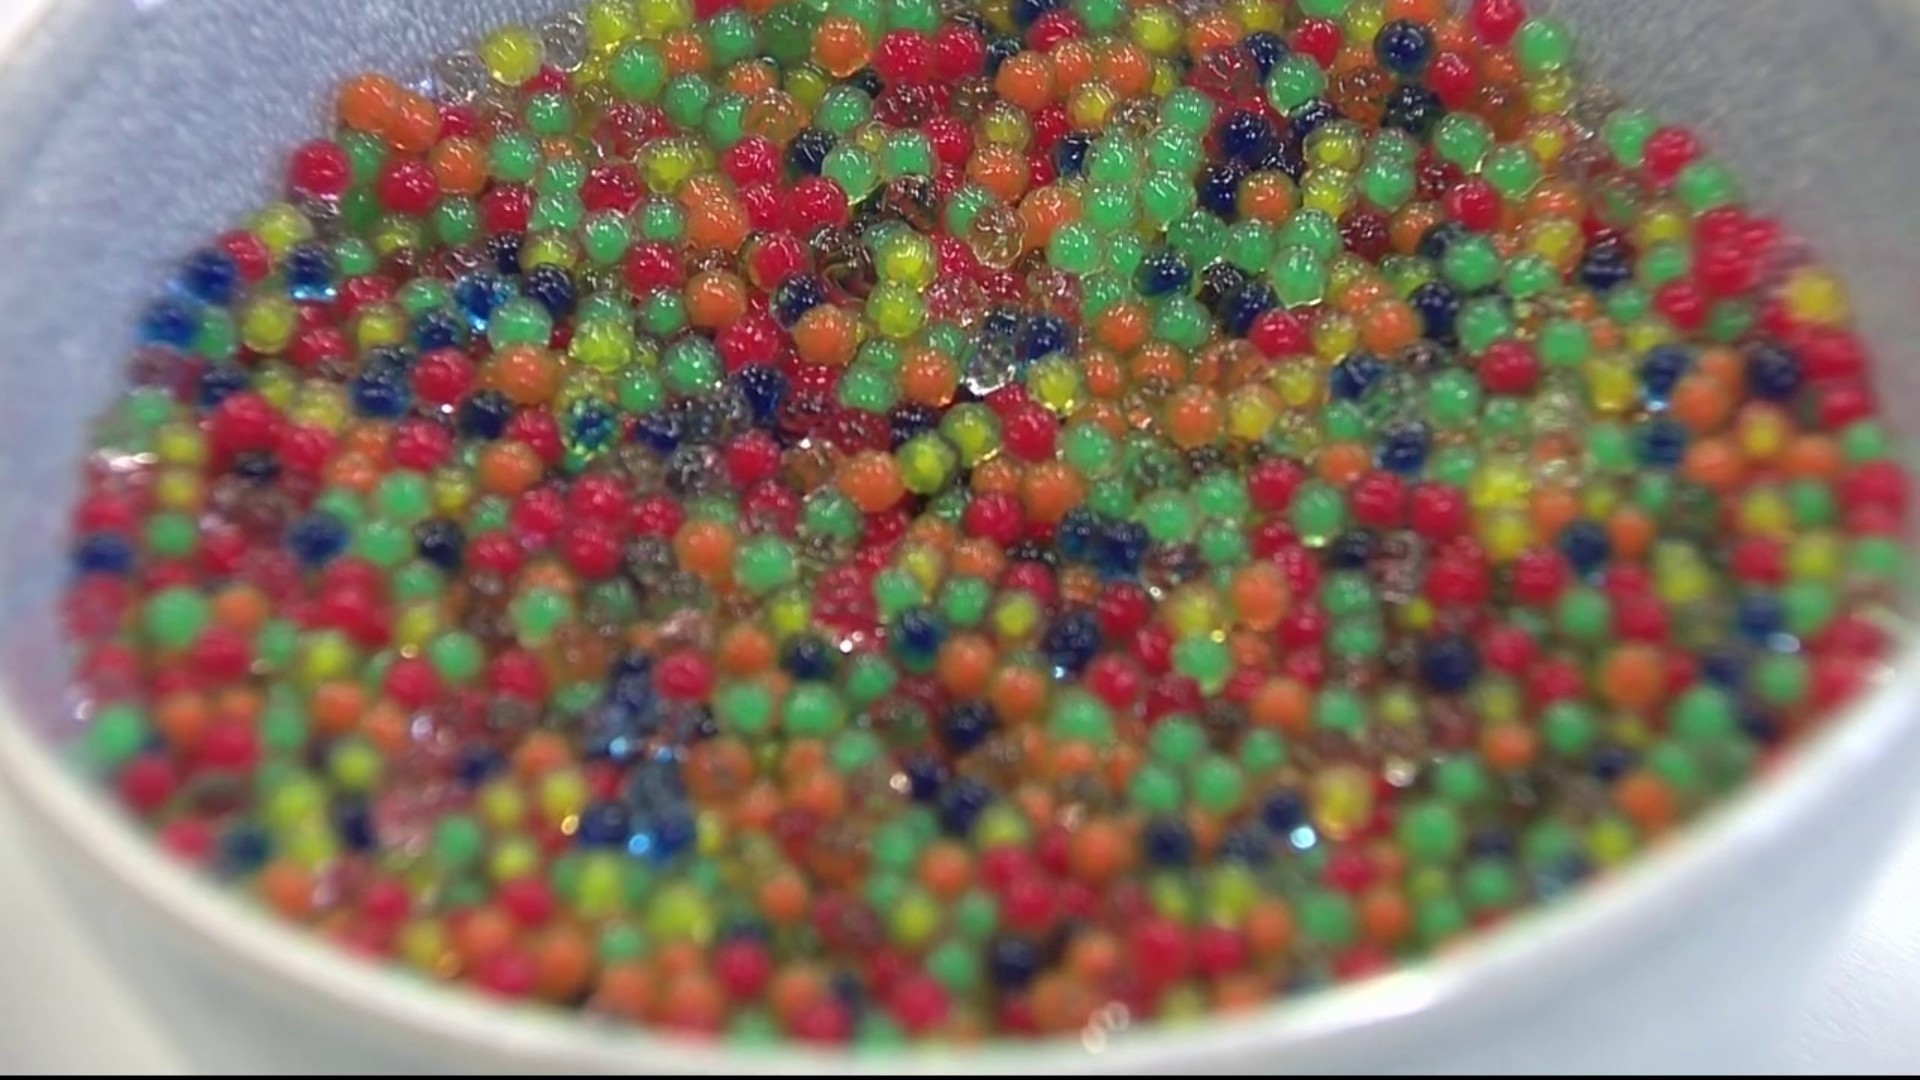 San Antonio mom feels vindicated after tests show water beads can be toxic